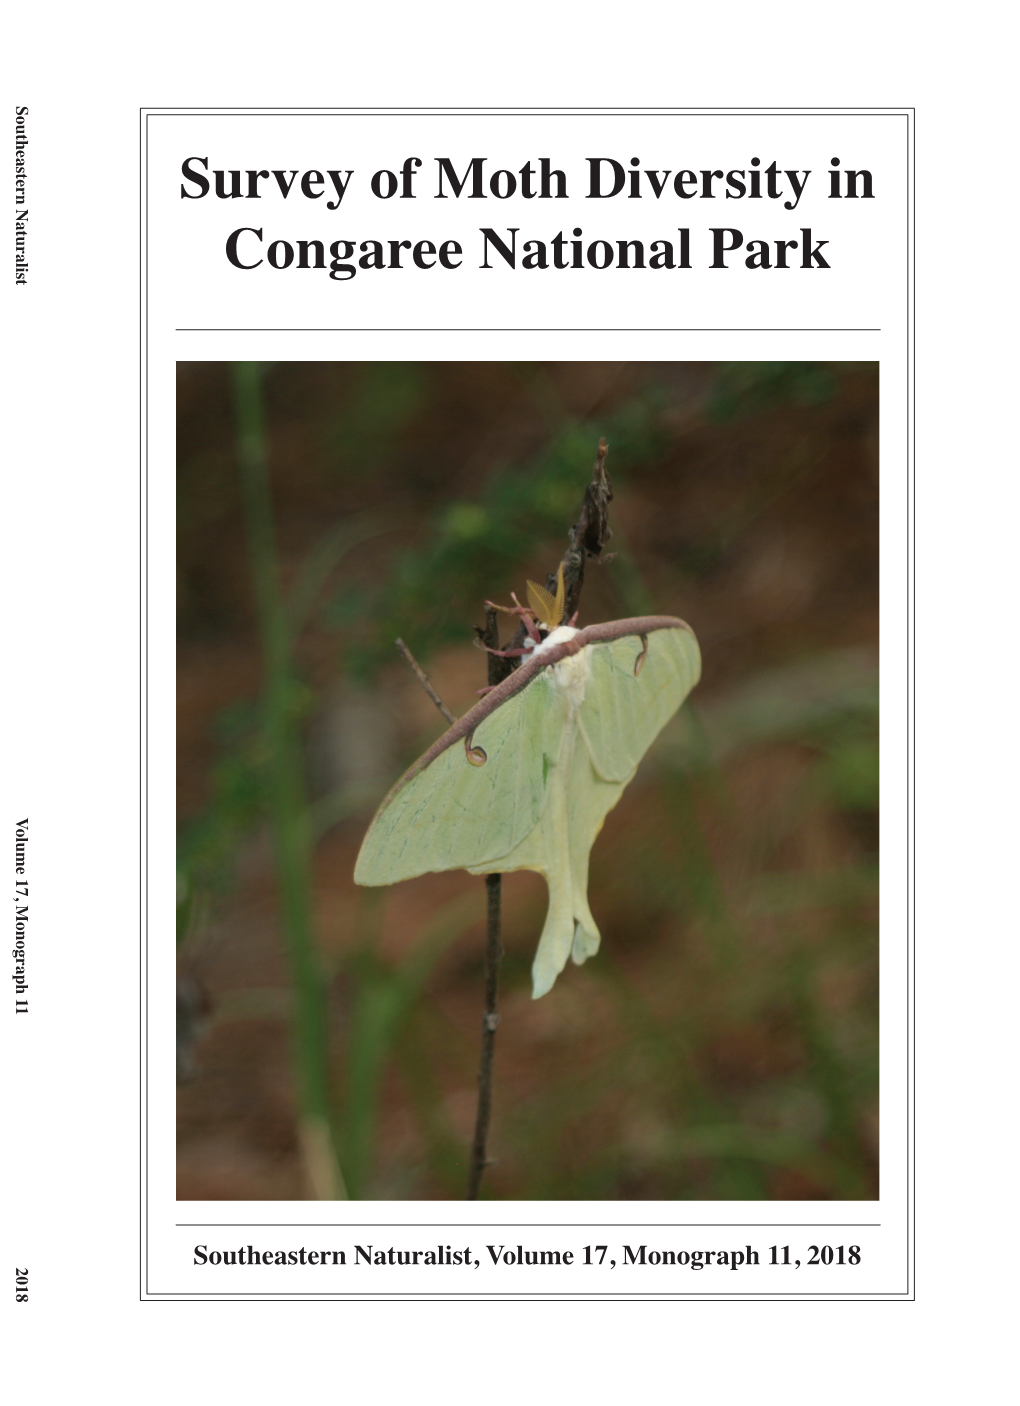 Survey of Moth Diversity in Congaree National Park